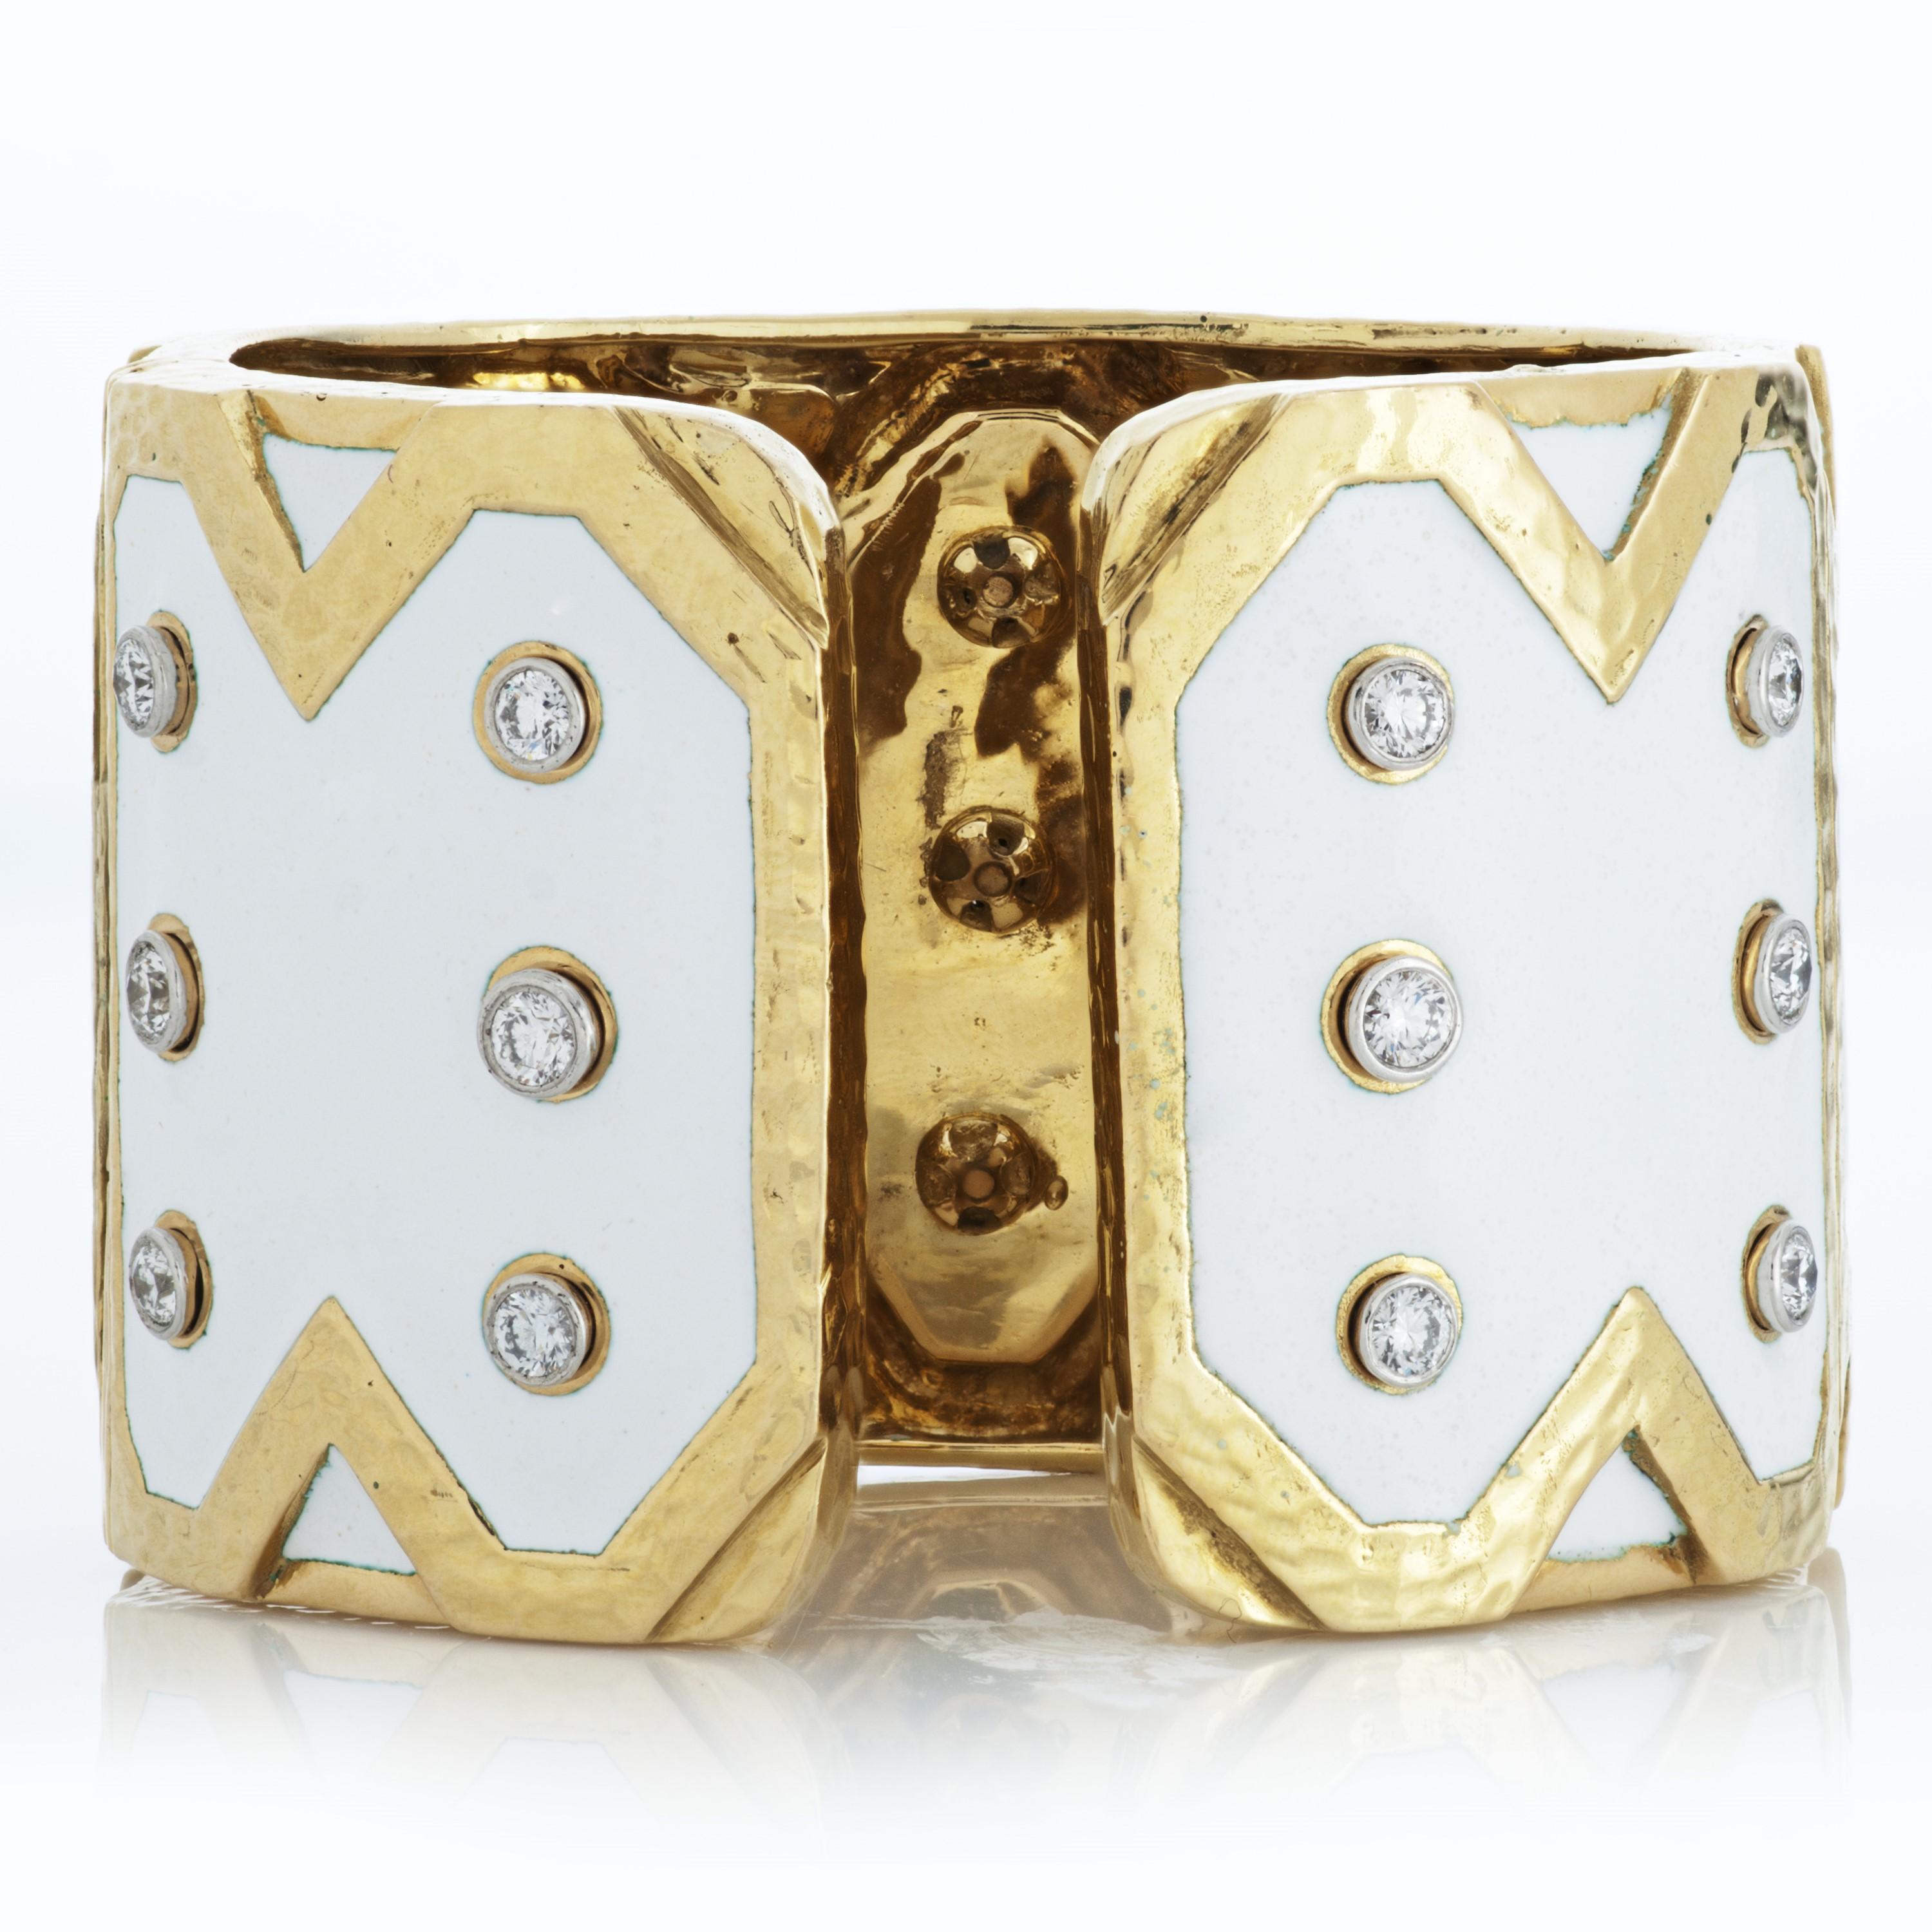 David Webb white enamel and diamond Rickrack cuff bracelet in 18k yellow gold, accompanied by a David Webb box and David Webb Certificate of Authenticity.   

This bracelet features approximately 2.82 carats of collet-set round brilliant cut